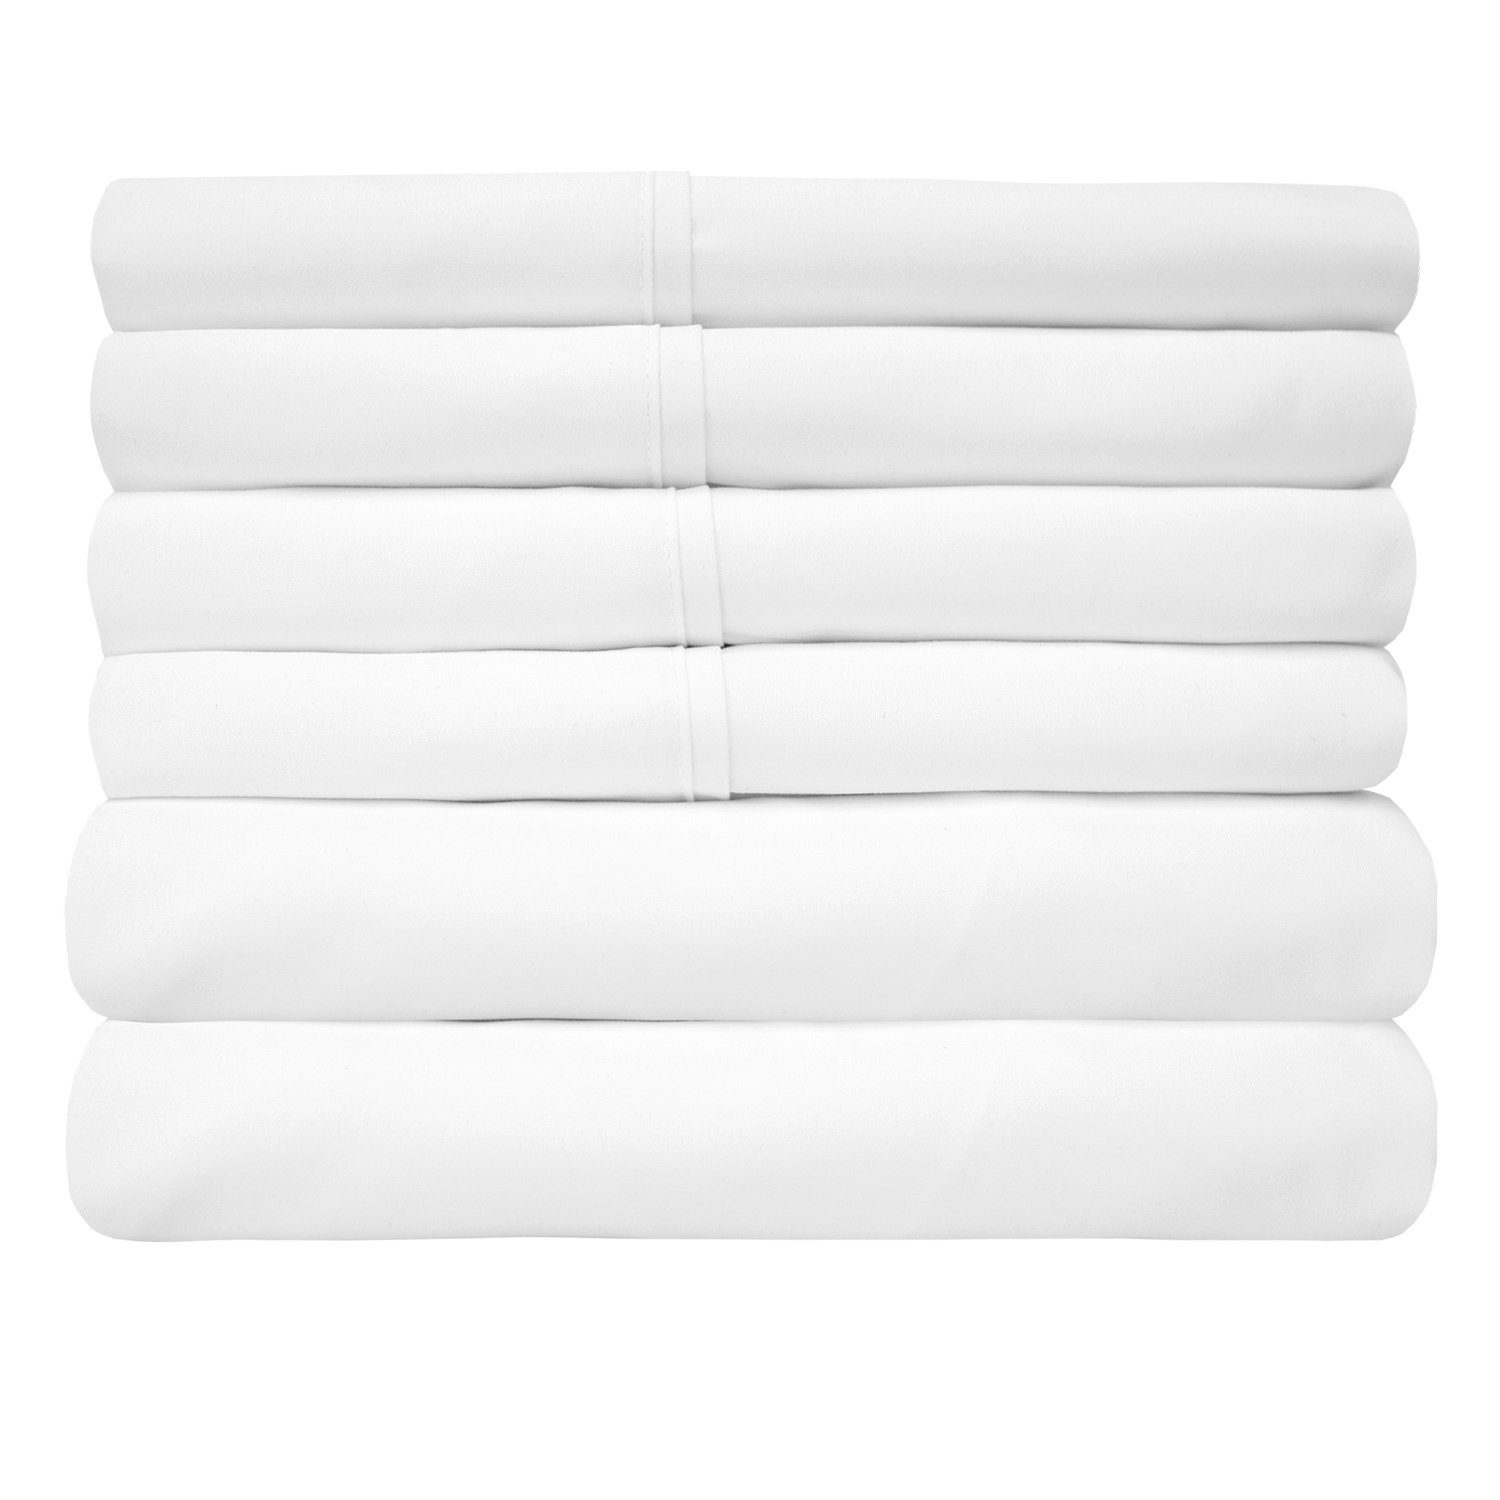 Deluxe 6-Piece Bed Sheet Set (White) - Folded 2